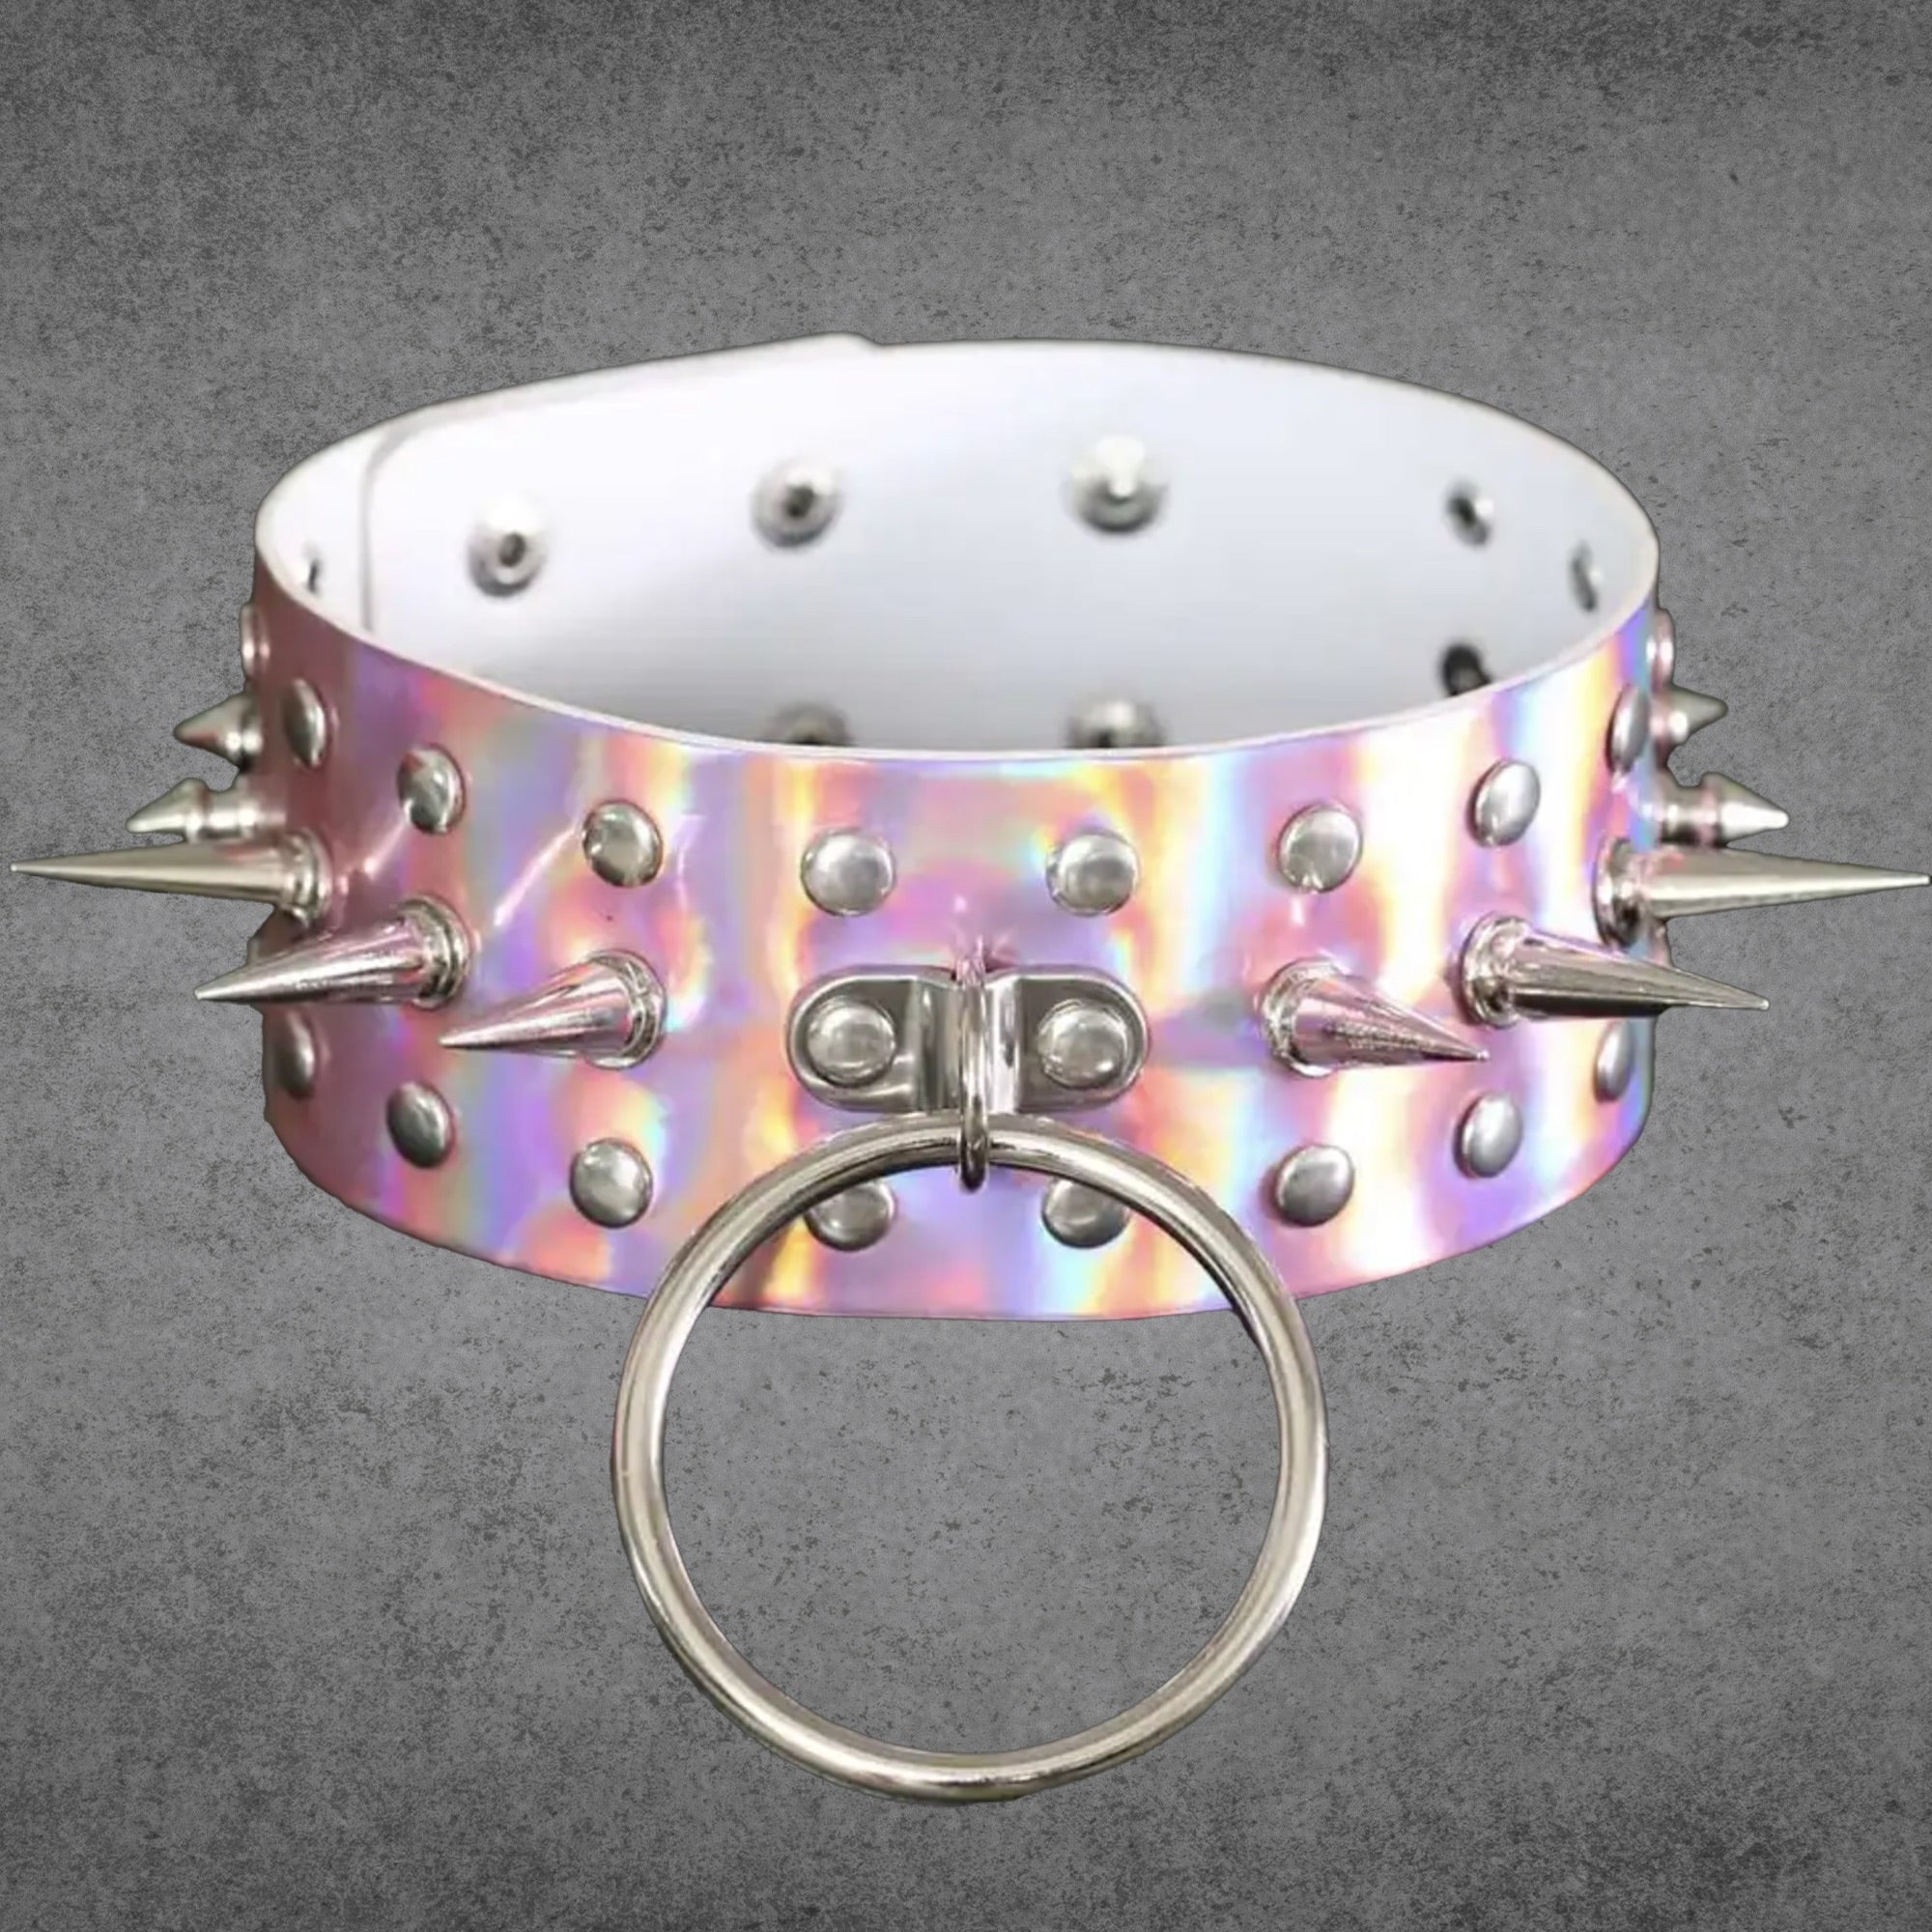 Large O Ring Spike Collar - Pink Chrome